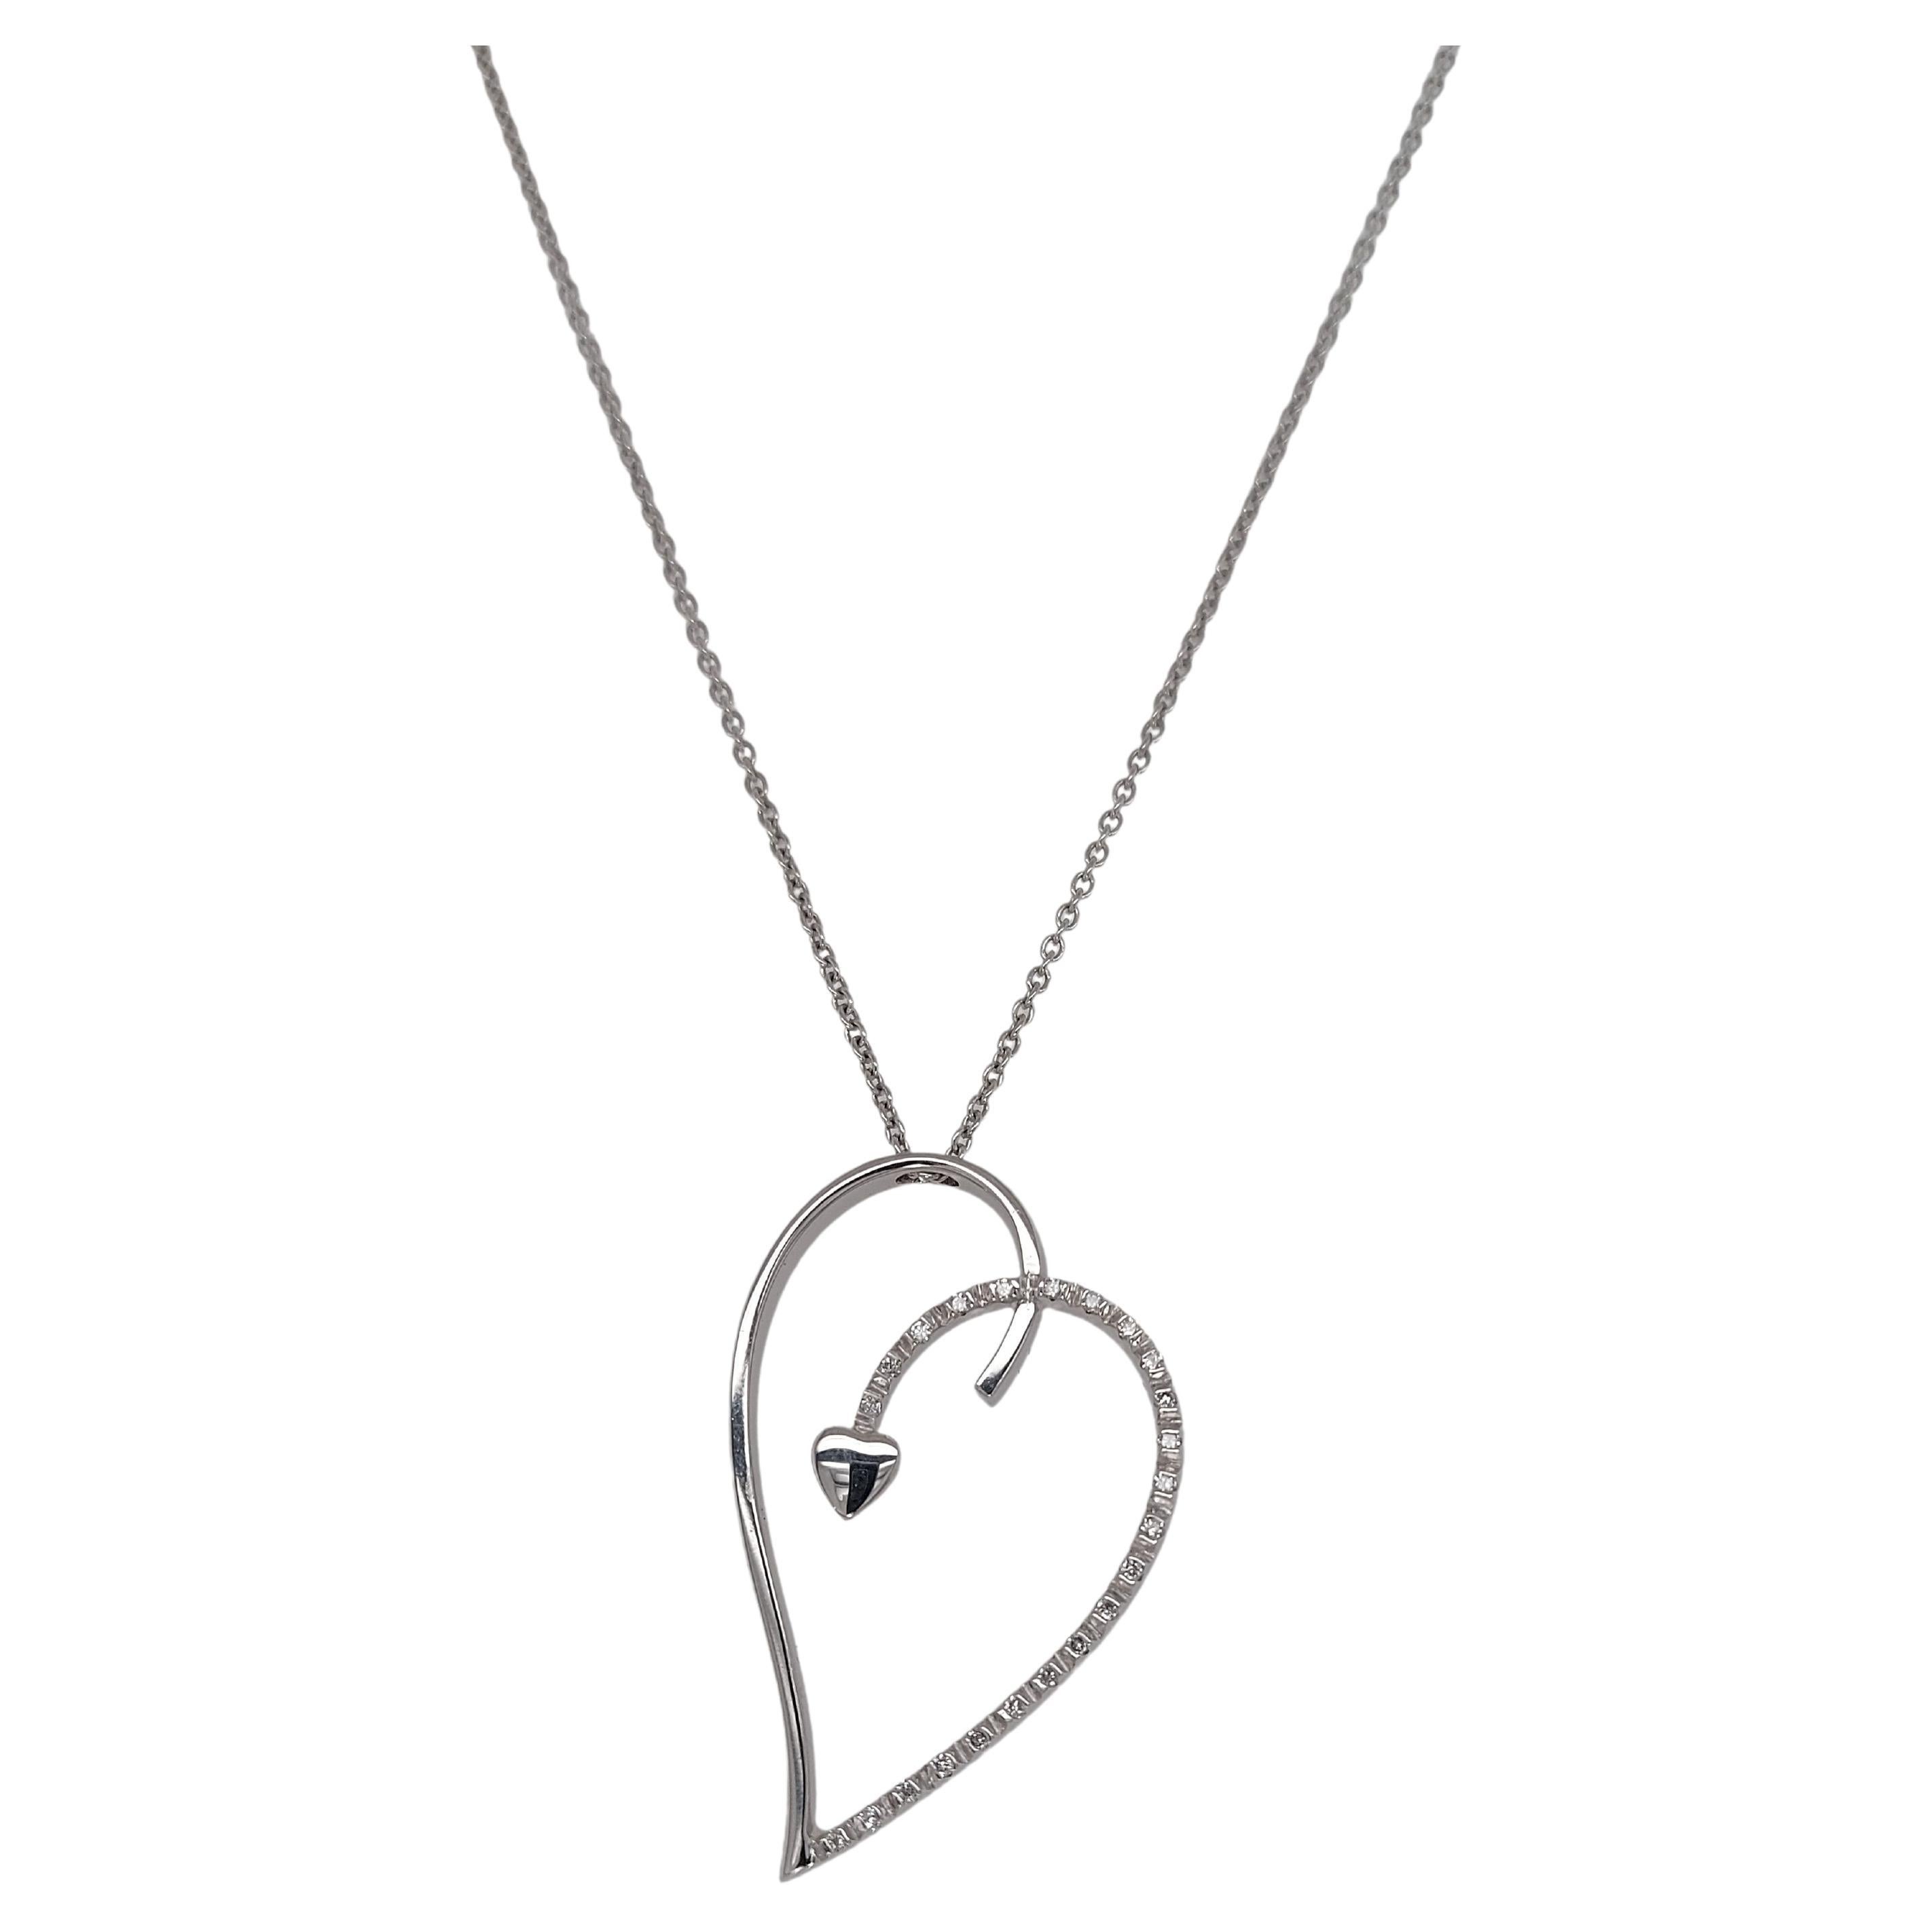 18kt White Gold Kappadue Heart Shaped Necklace with 0.12ct Diamonds